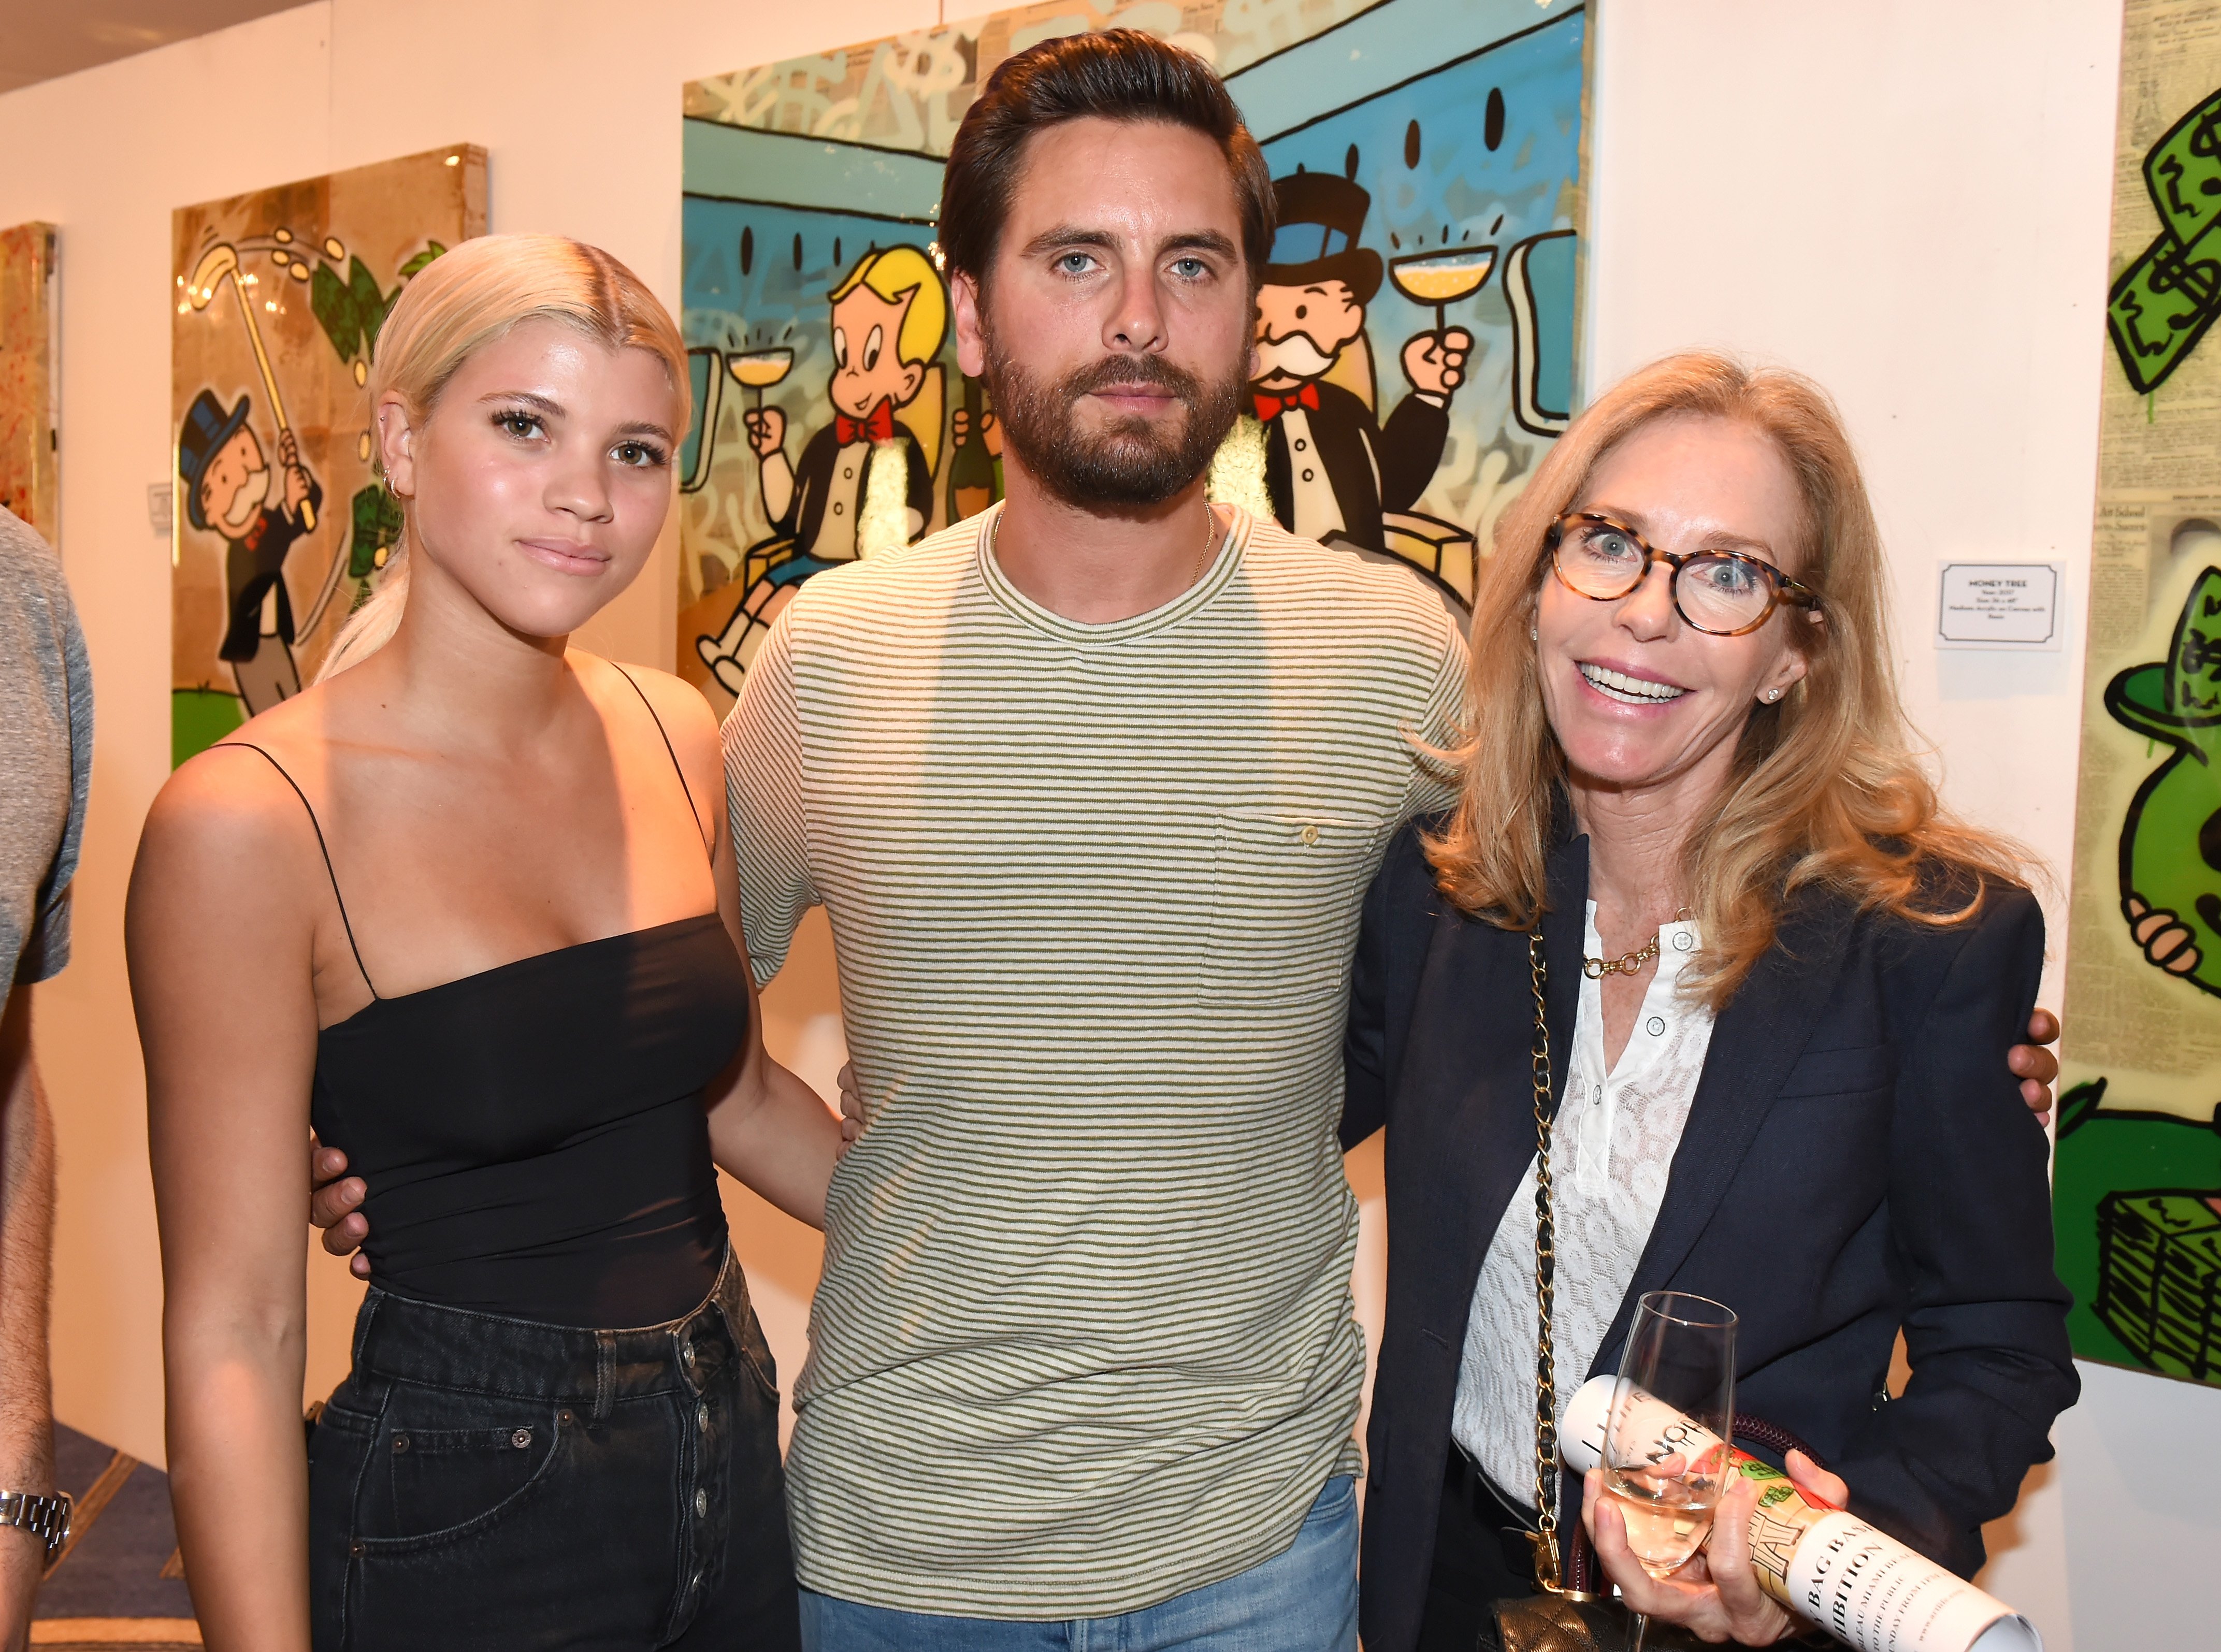 Sofia Richie, Scott Disick, and Alexandra Andon attend the opening of an art gallery at Fleur de Lis Ballroom in Miami Beach, Florida on December 7, 2017 | Photo: Getty Images